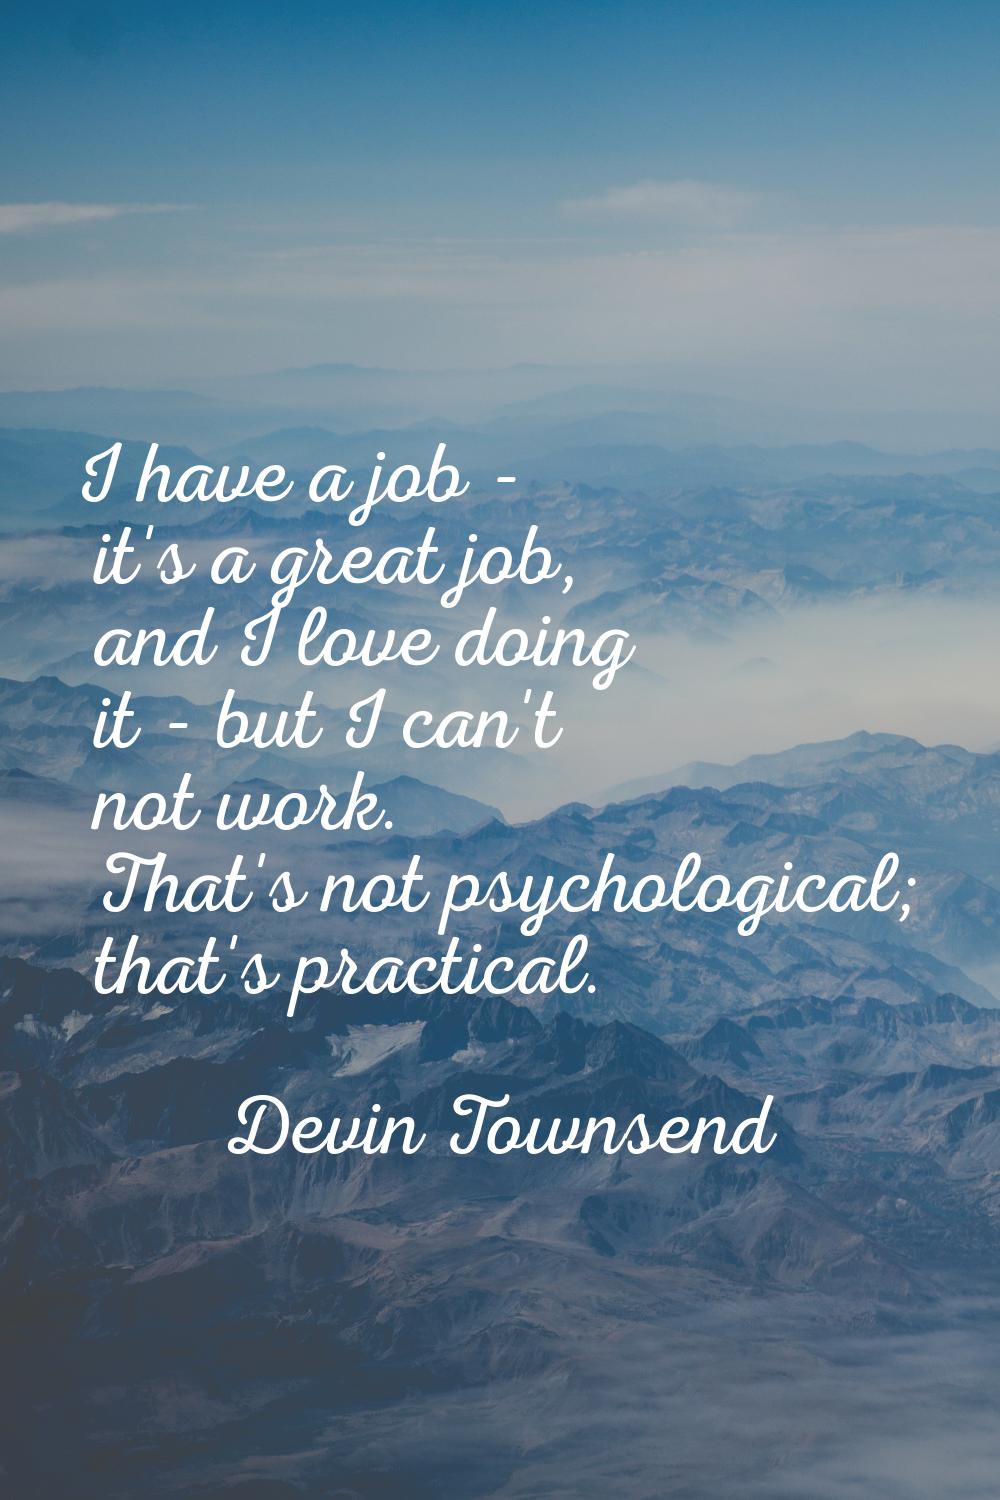 I have a job - it's a great job, and I love doing it - but I can't not work. That's not psychologic